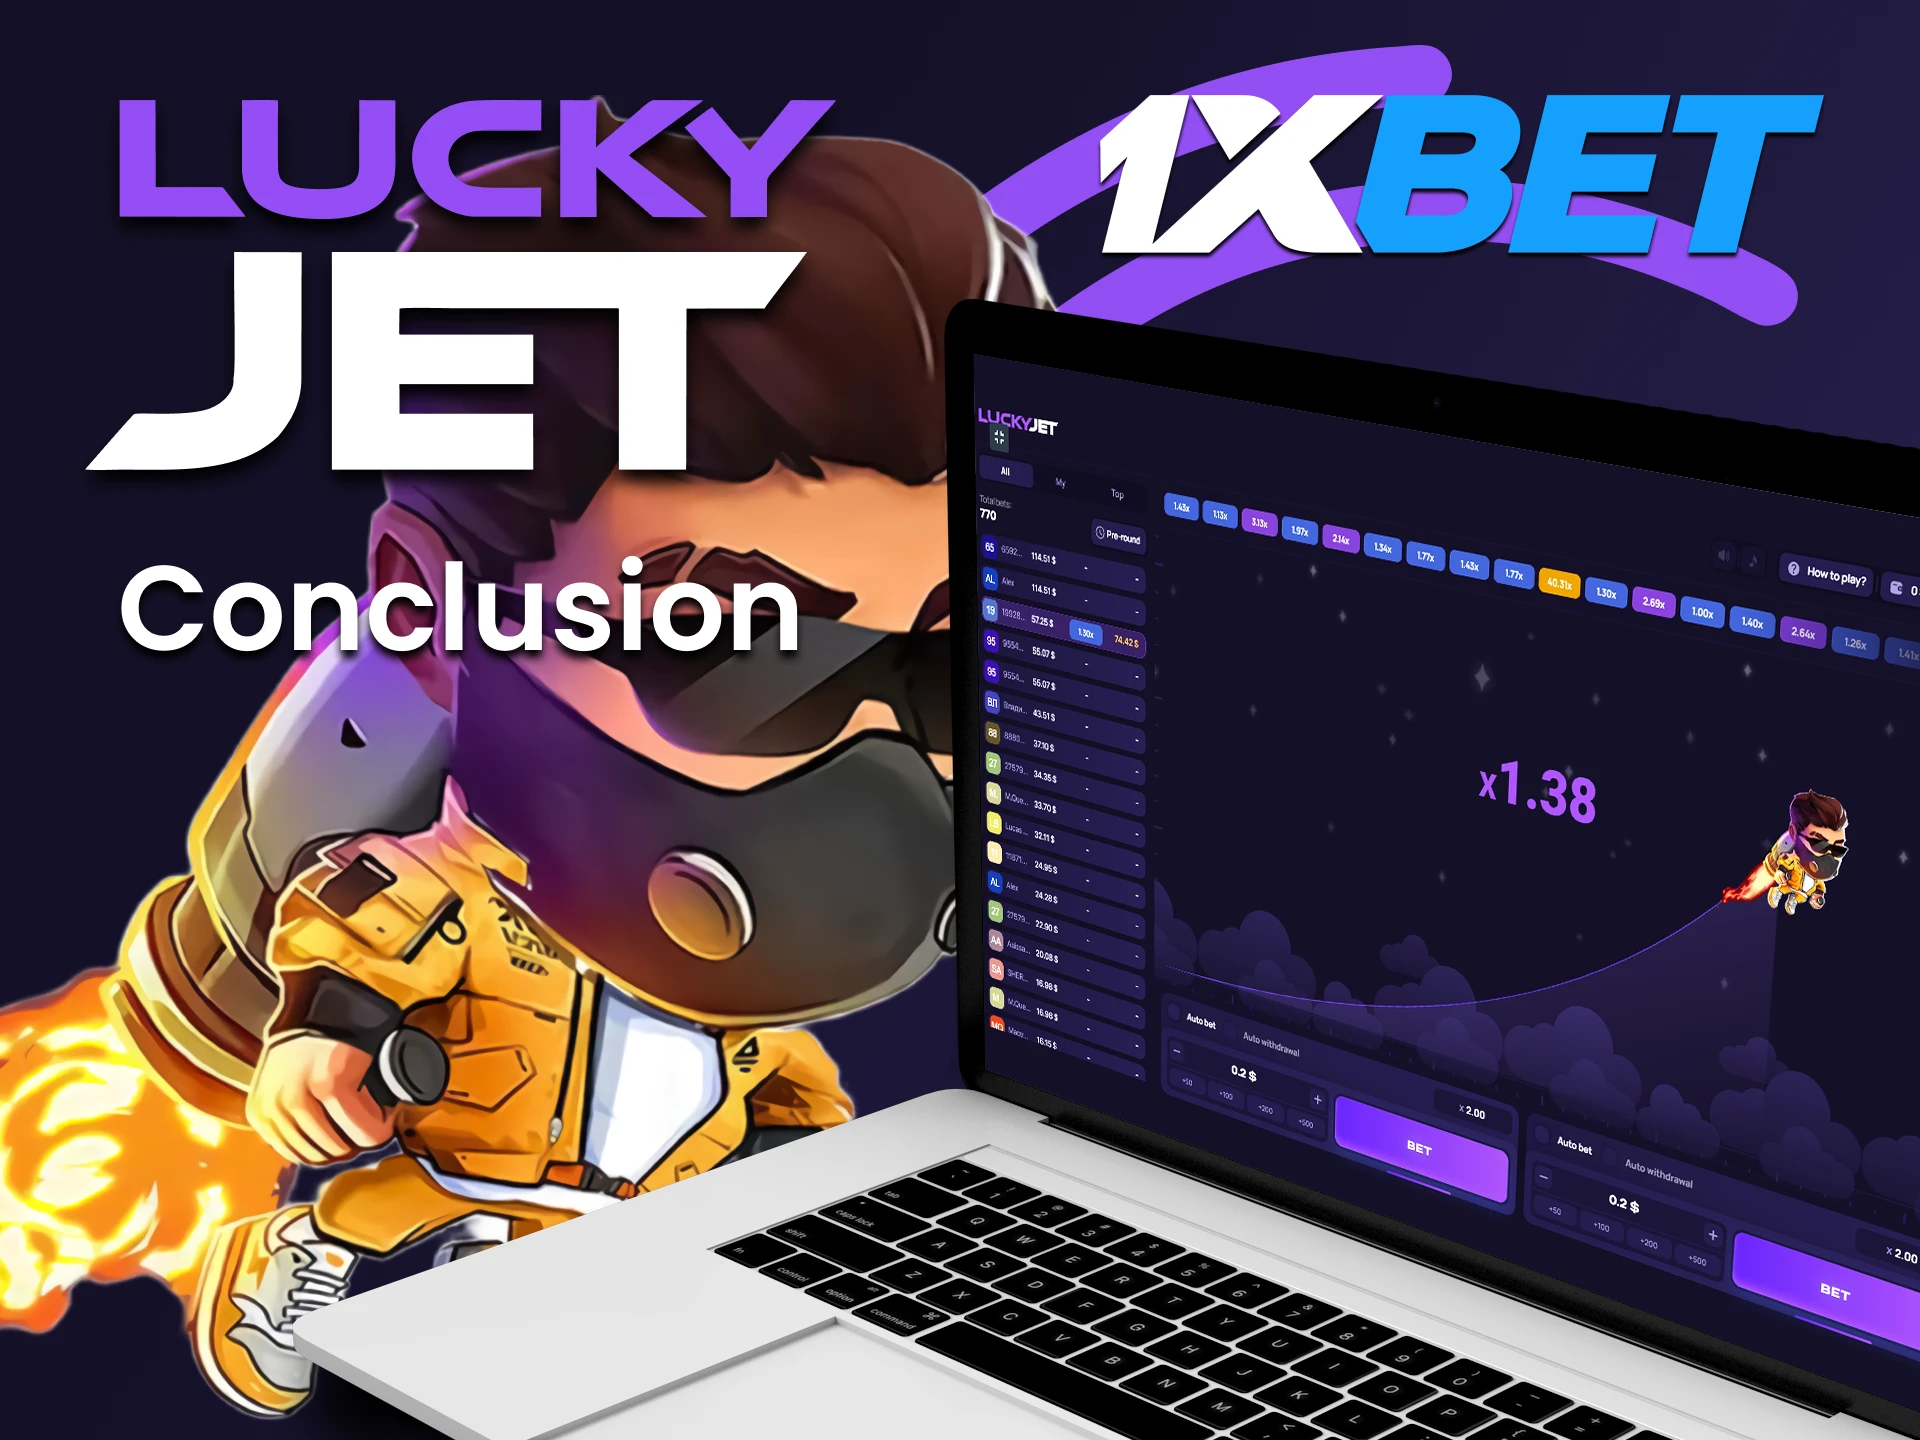 1xbet will pleasantly surprise you with the game Lucky Jet.